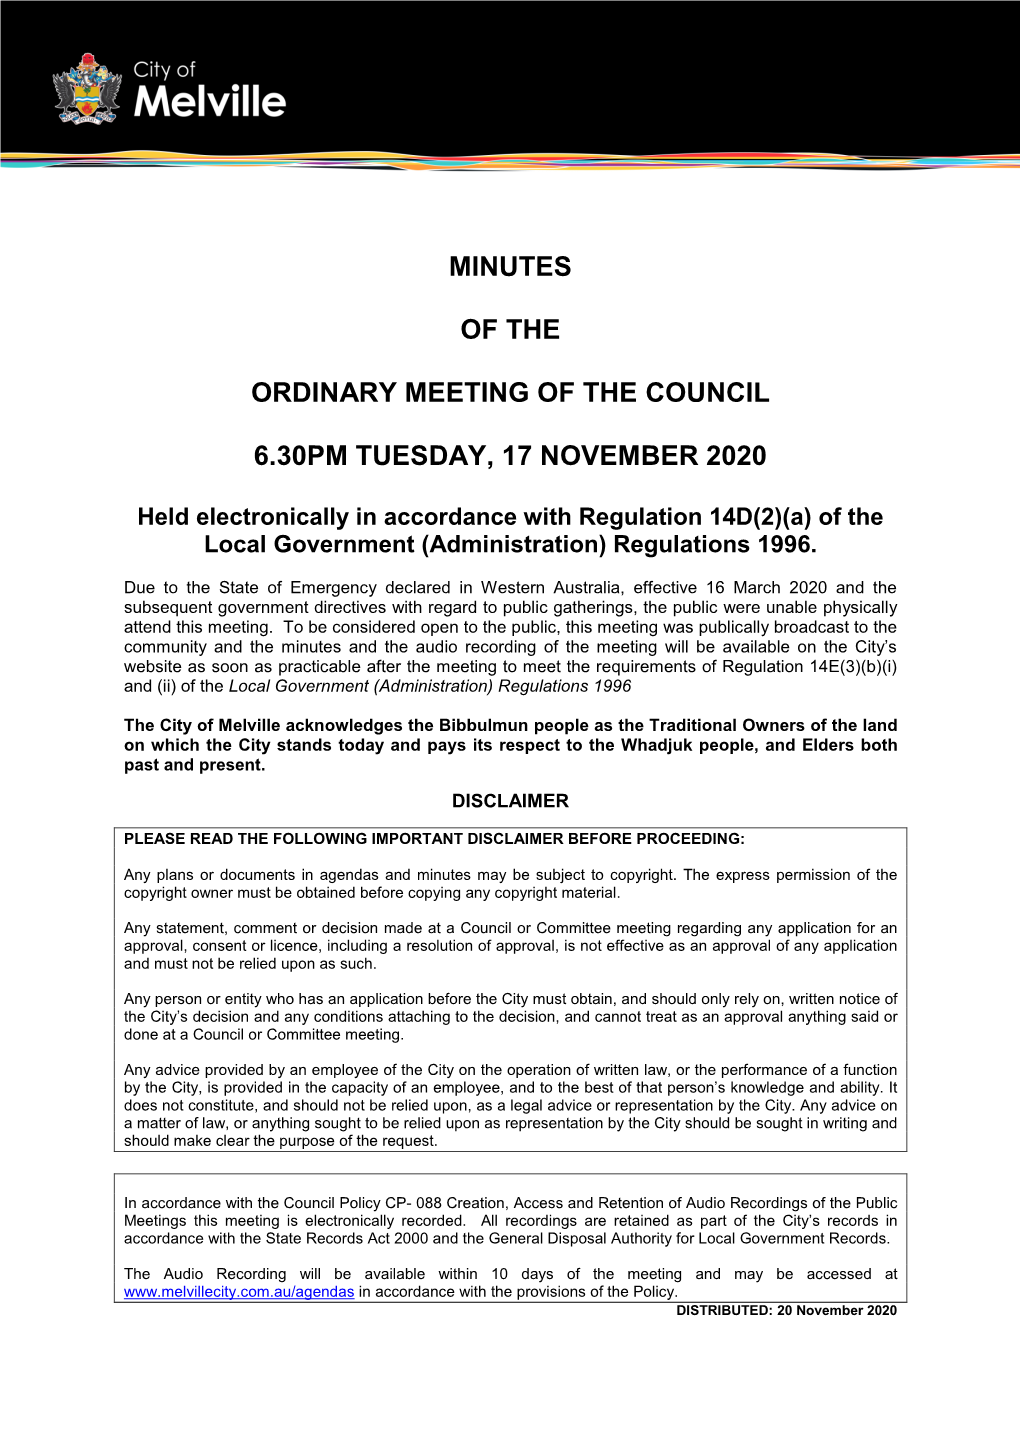 Minutes of the Ordinary Meeting of the Council 6.30Pm Tuesday, 17 November 2020